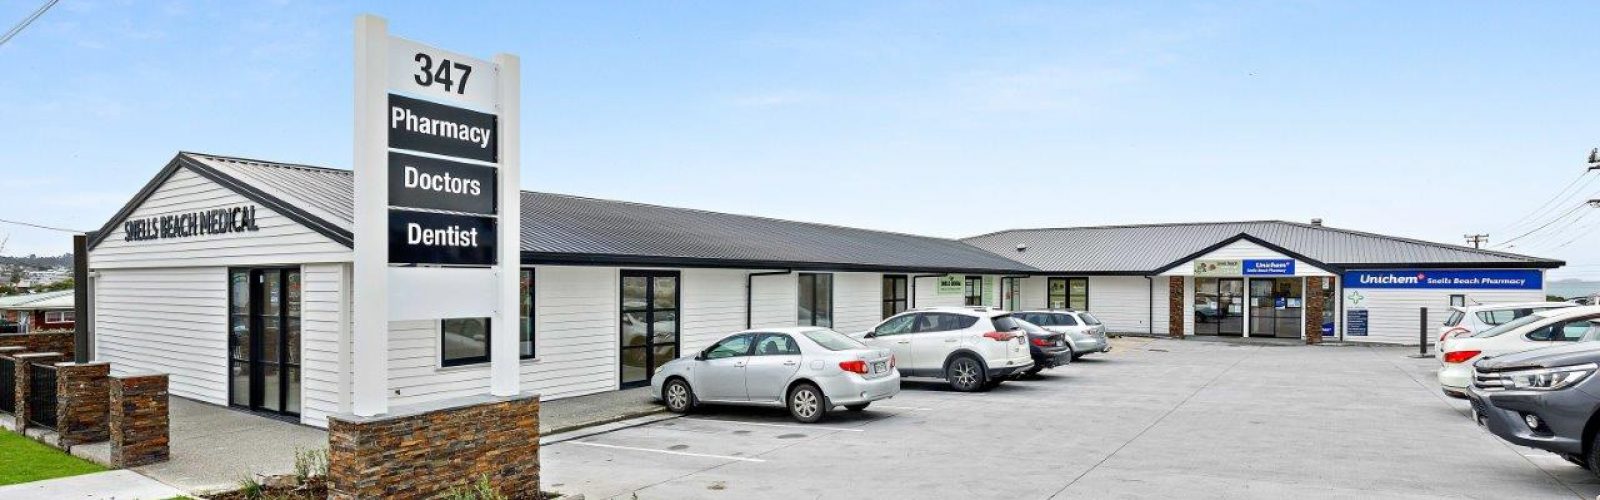 Snell’s Beach Medical Centre - Header Image